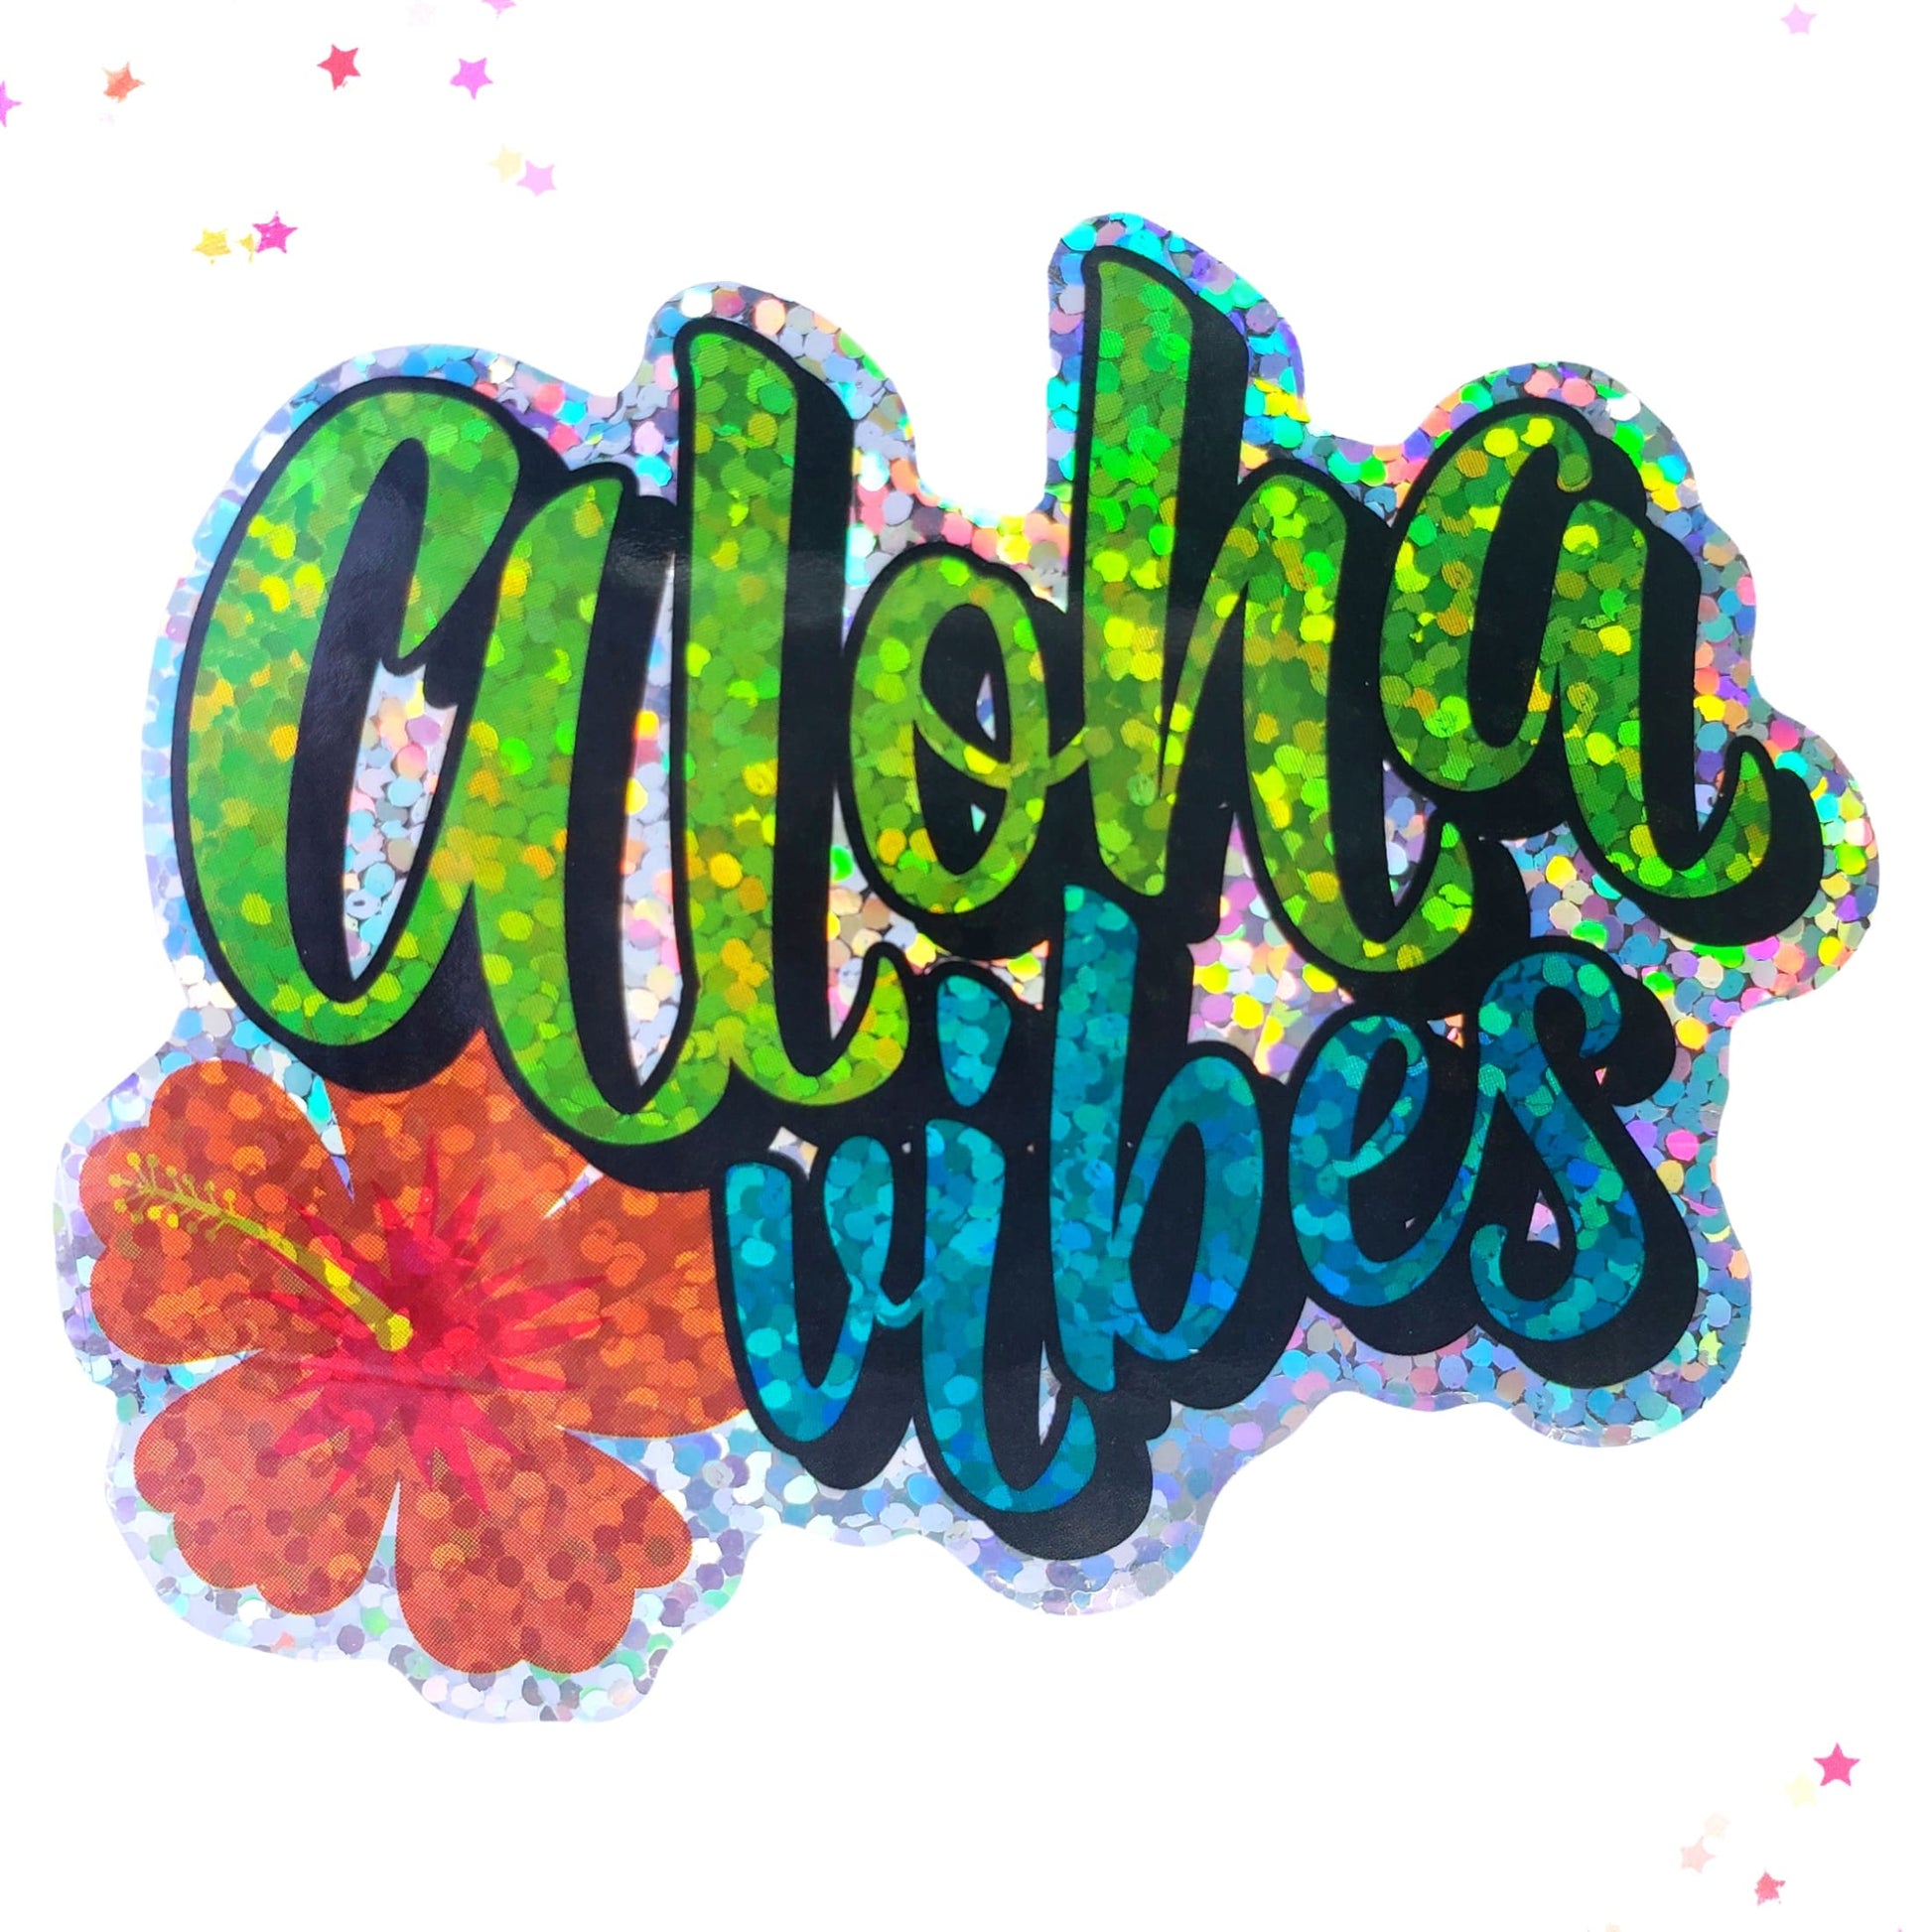 Premium Sticker - Sparkly Holographic Glitter Aloha Vibes from Confetti Kitty, Only 2.00